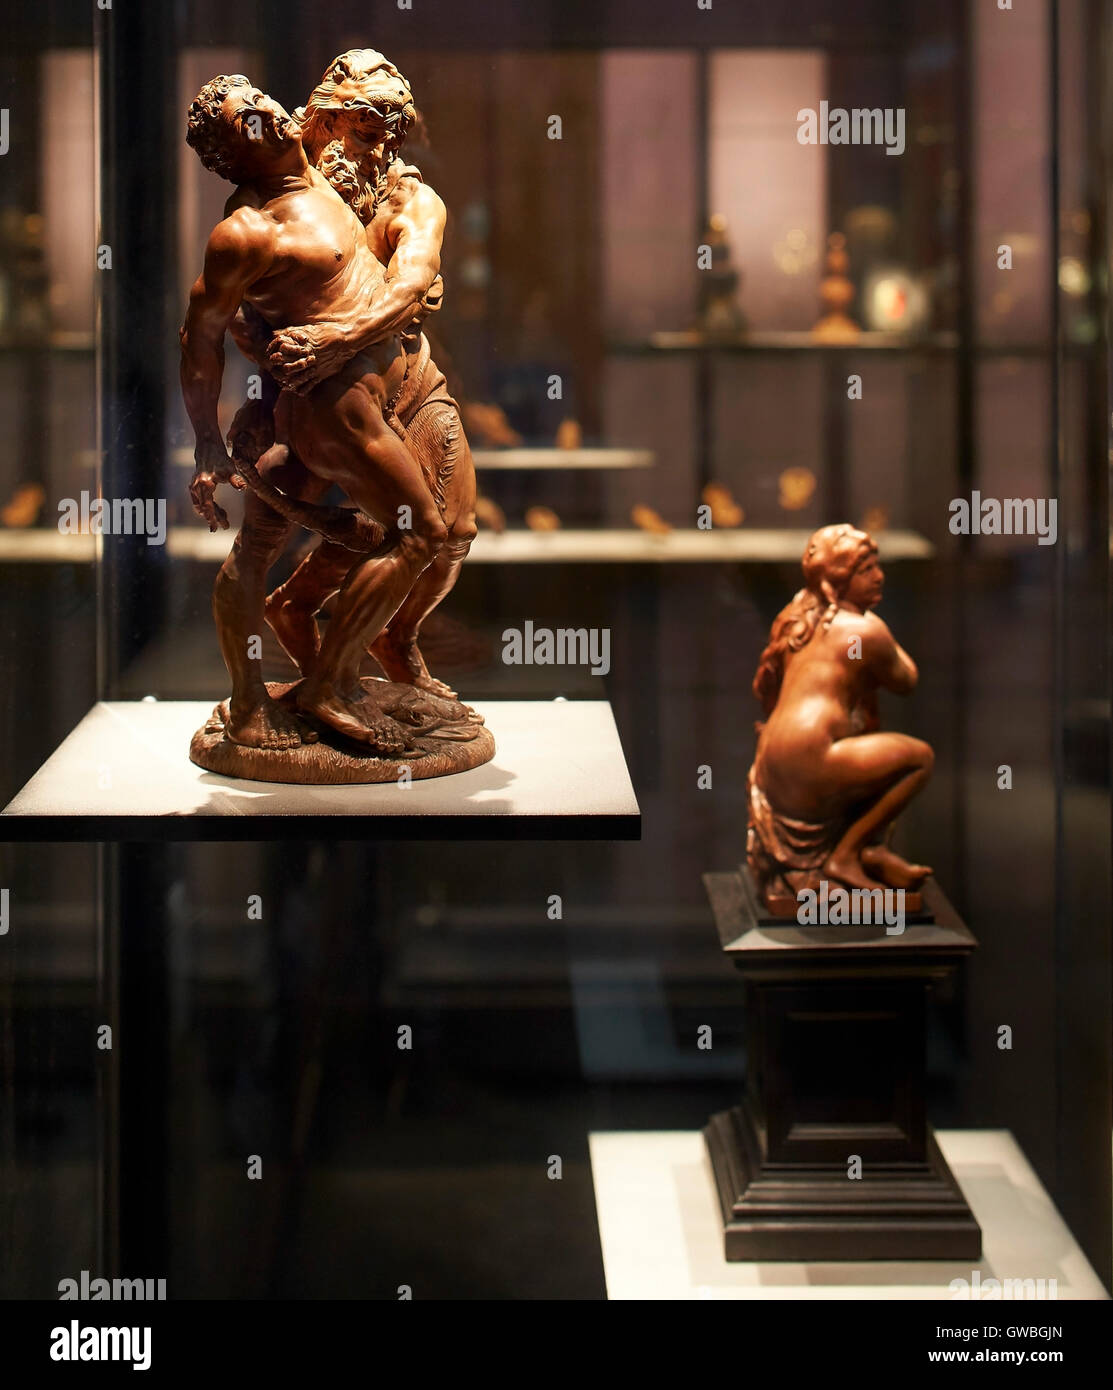 Hercules and Achelous statuette, 17th century. Waddesdon Bequest Gallery at the British Museum, London, United Kingdom. Architect: Stanton Williams, 2015. Stock Photo